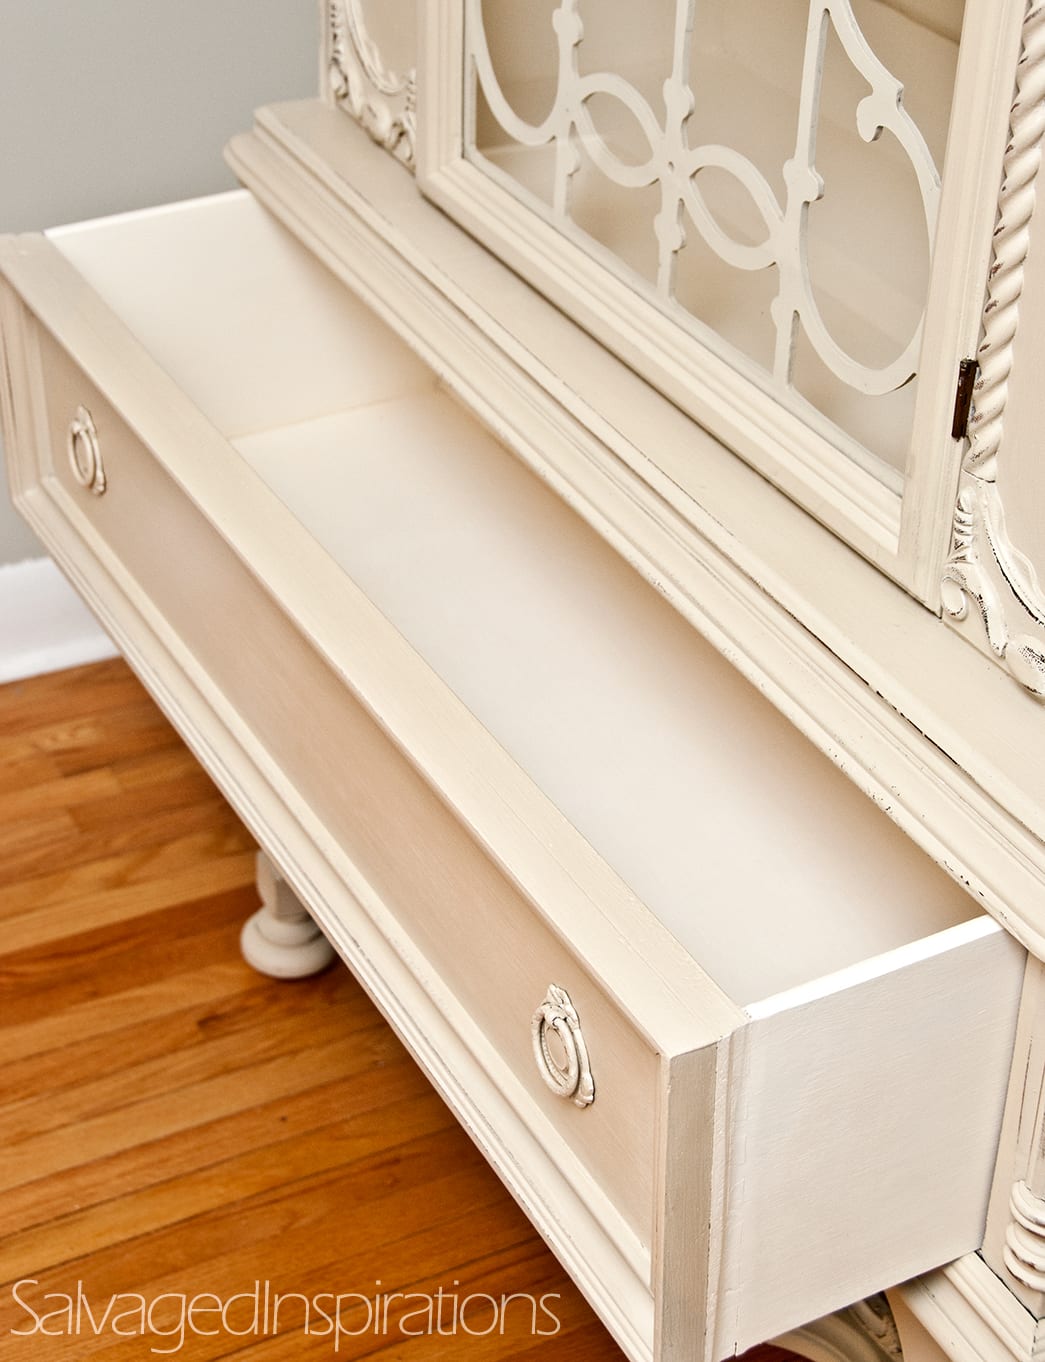 To Paint or Not To Paint the Inside of Drawers